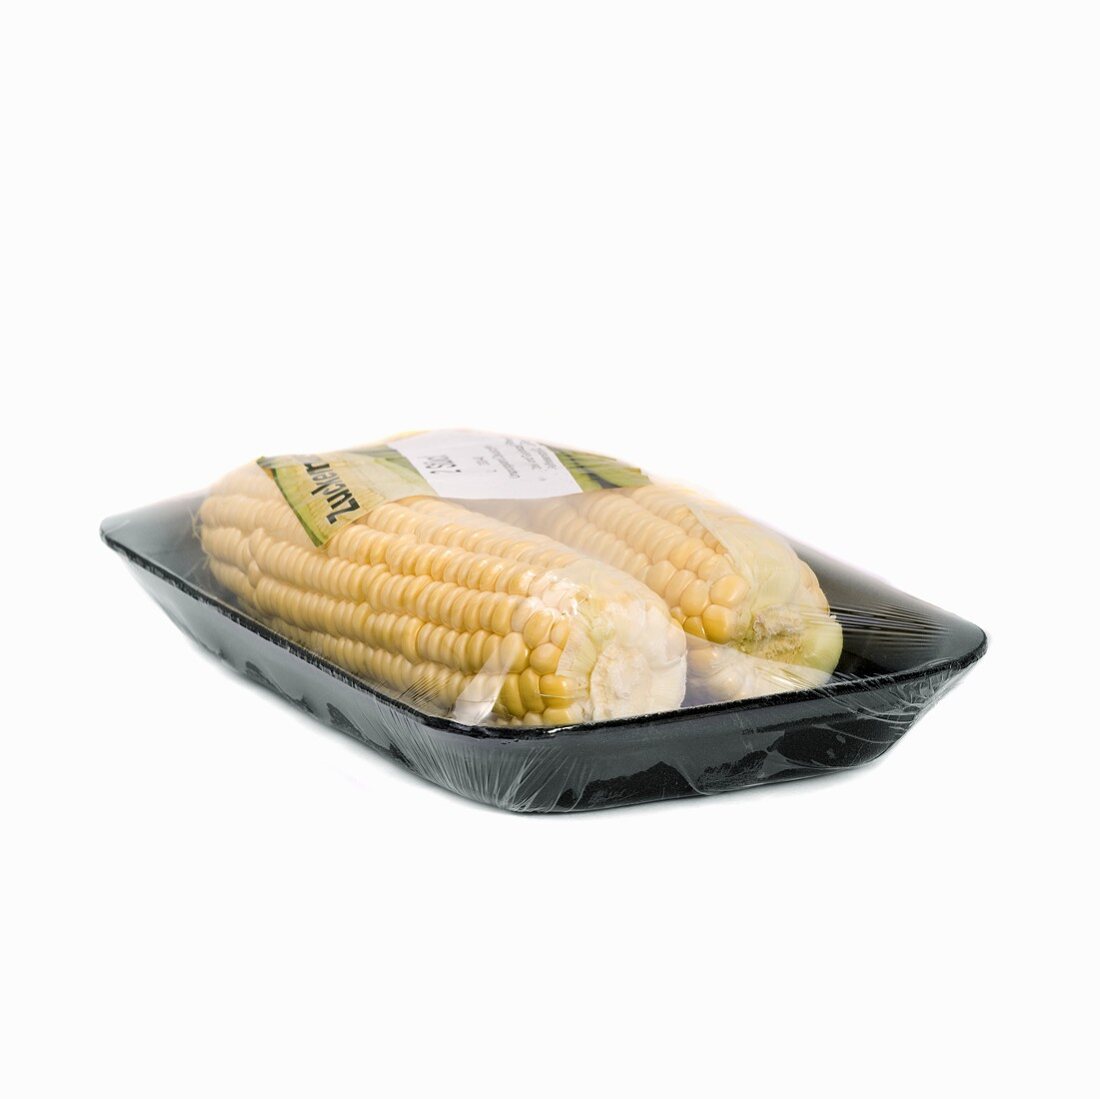 Corn on the cobs in packaging